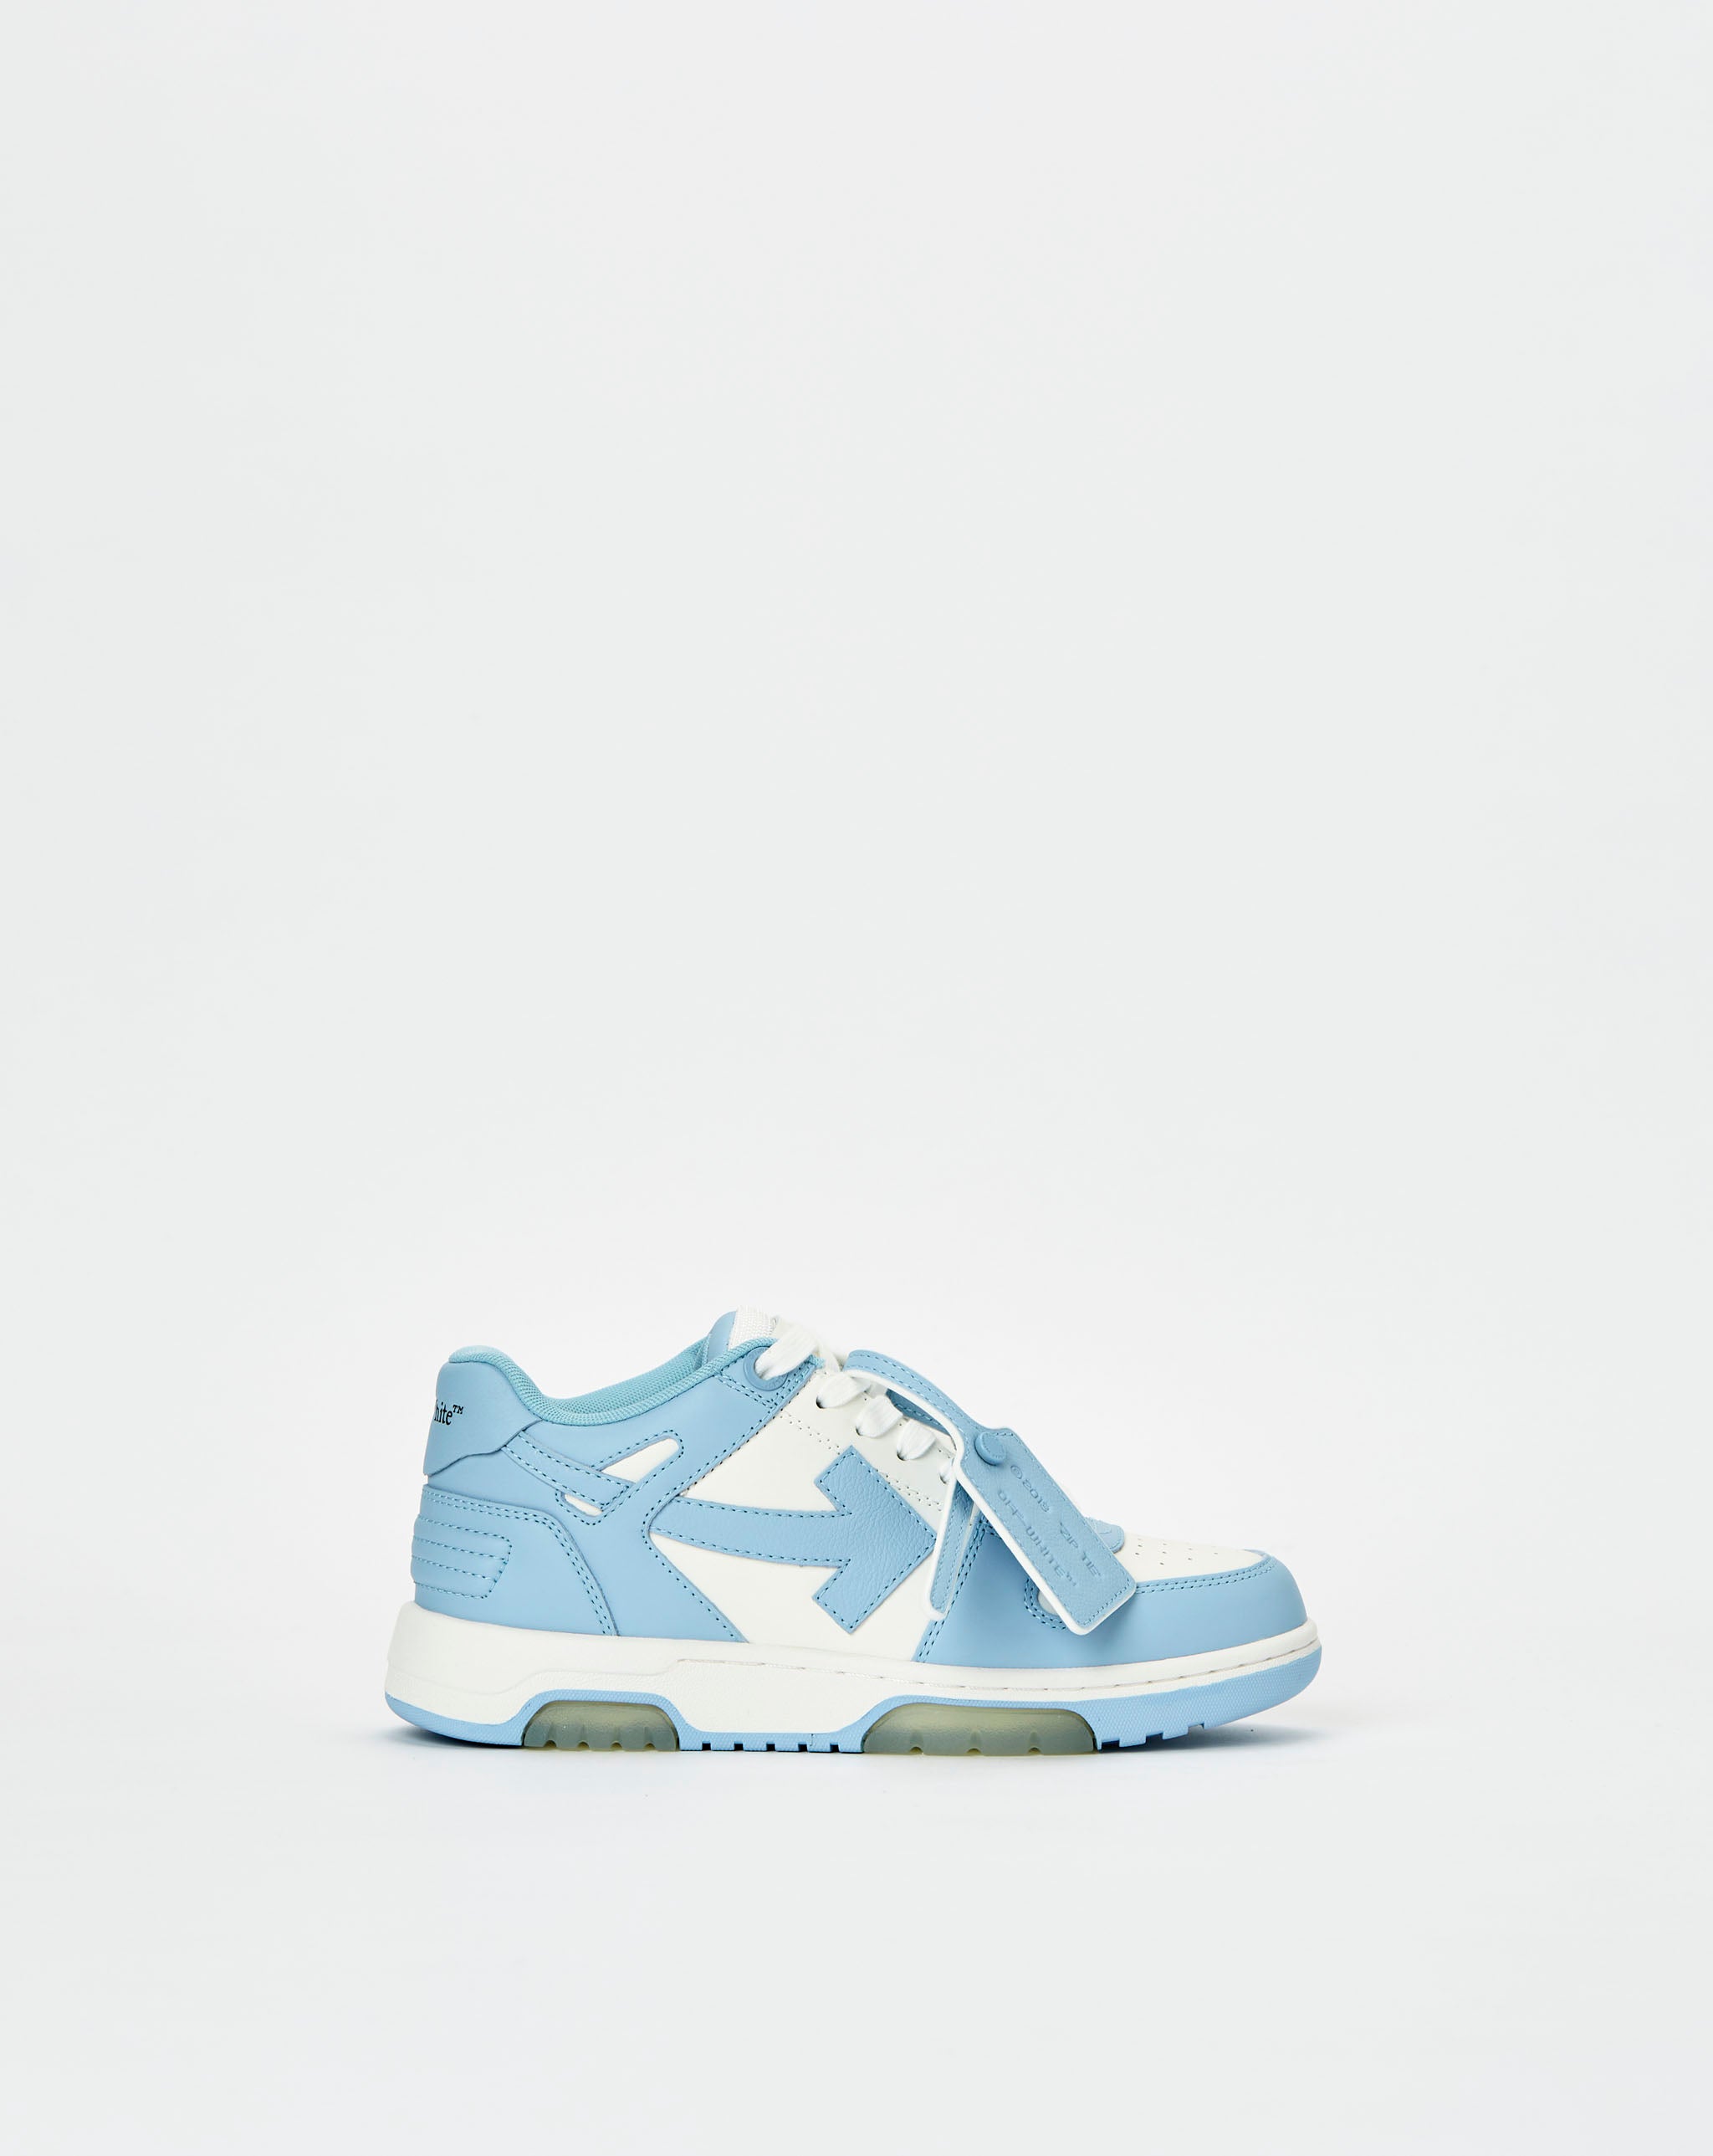 Off-White OOO Low Out of Office Calf Leather White Light Blue